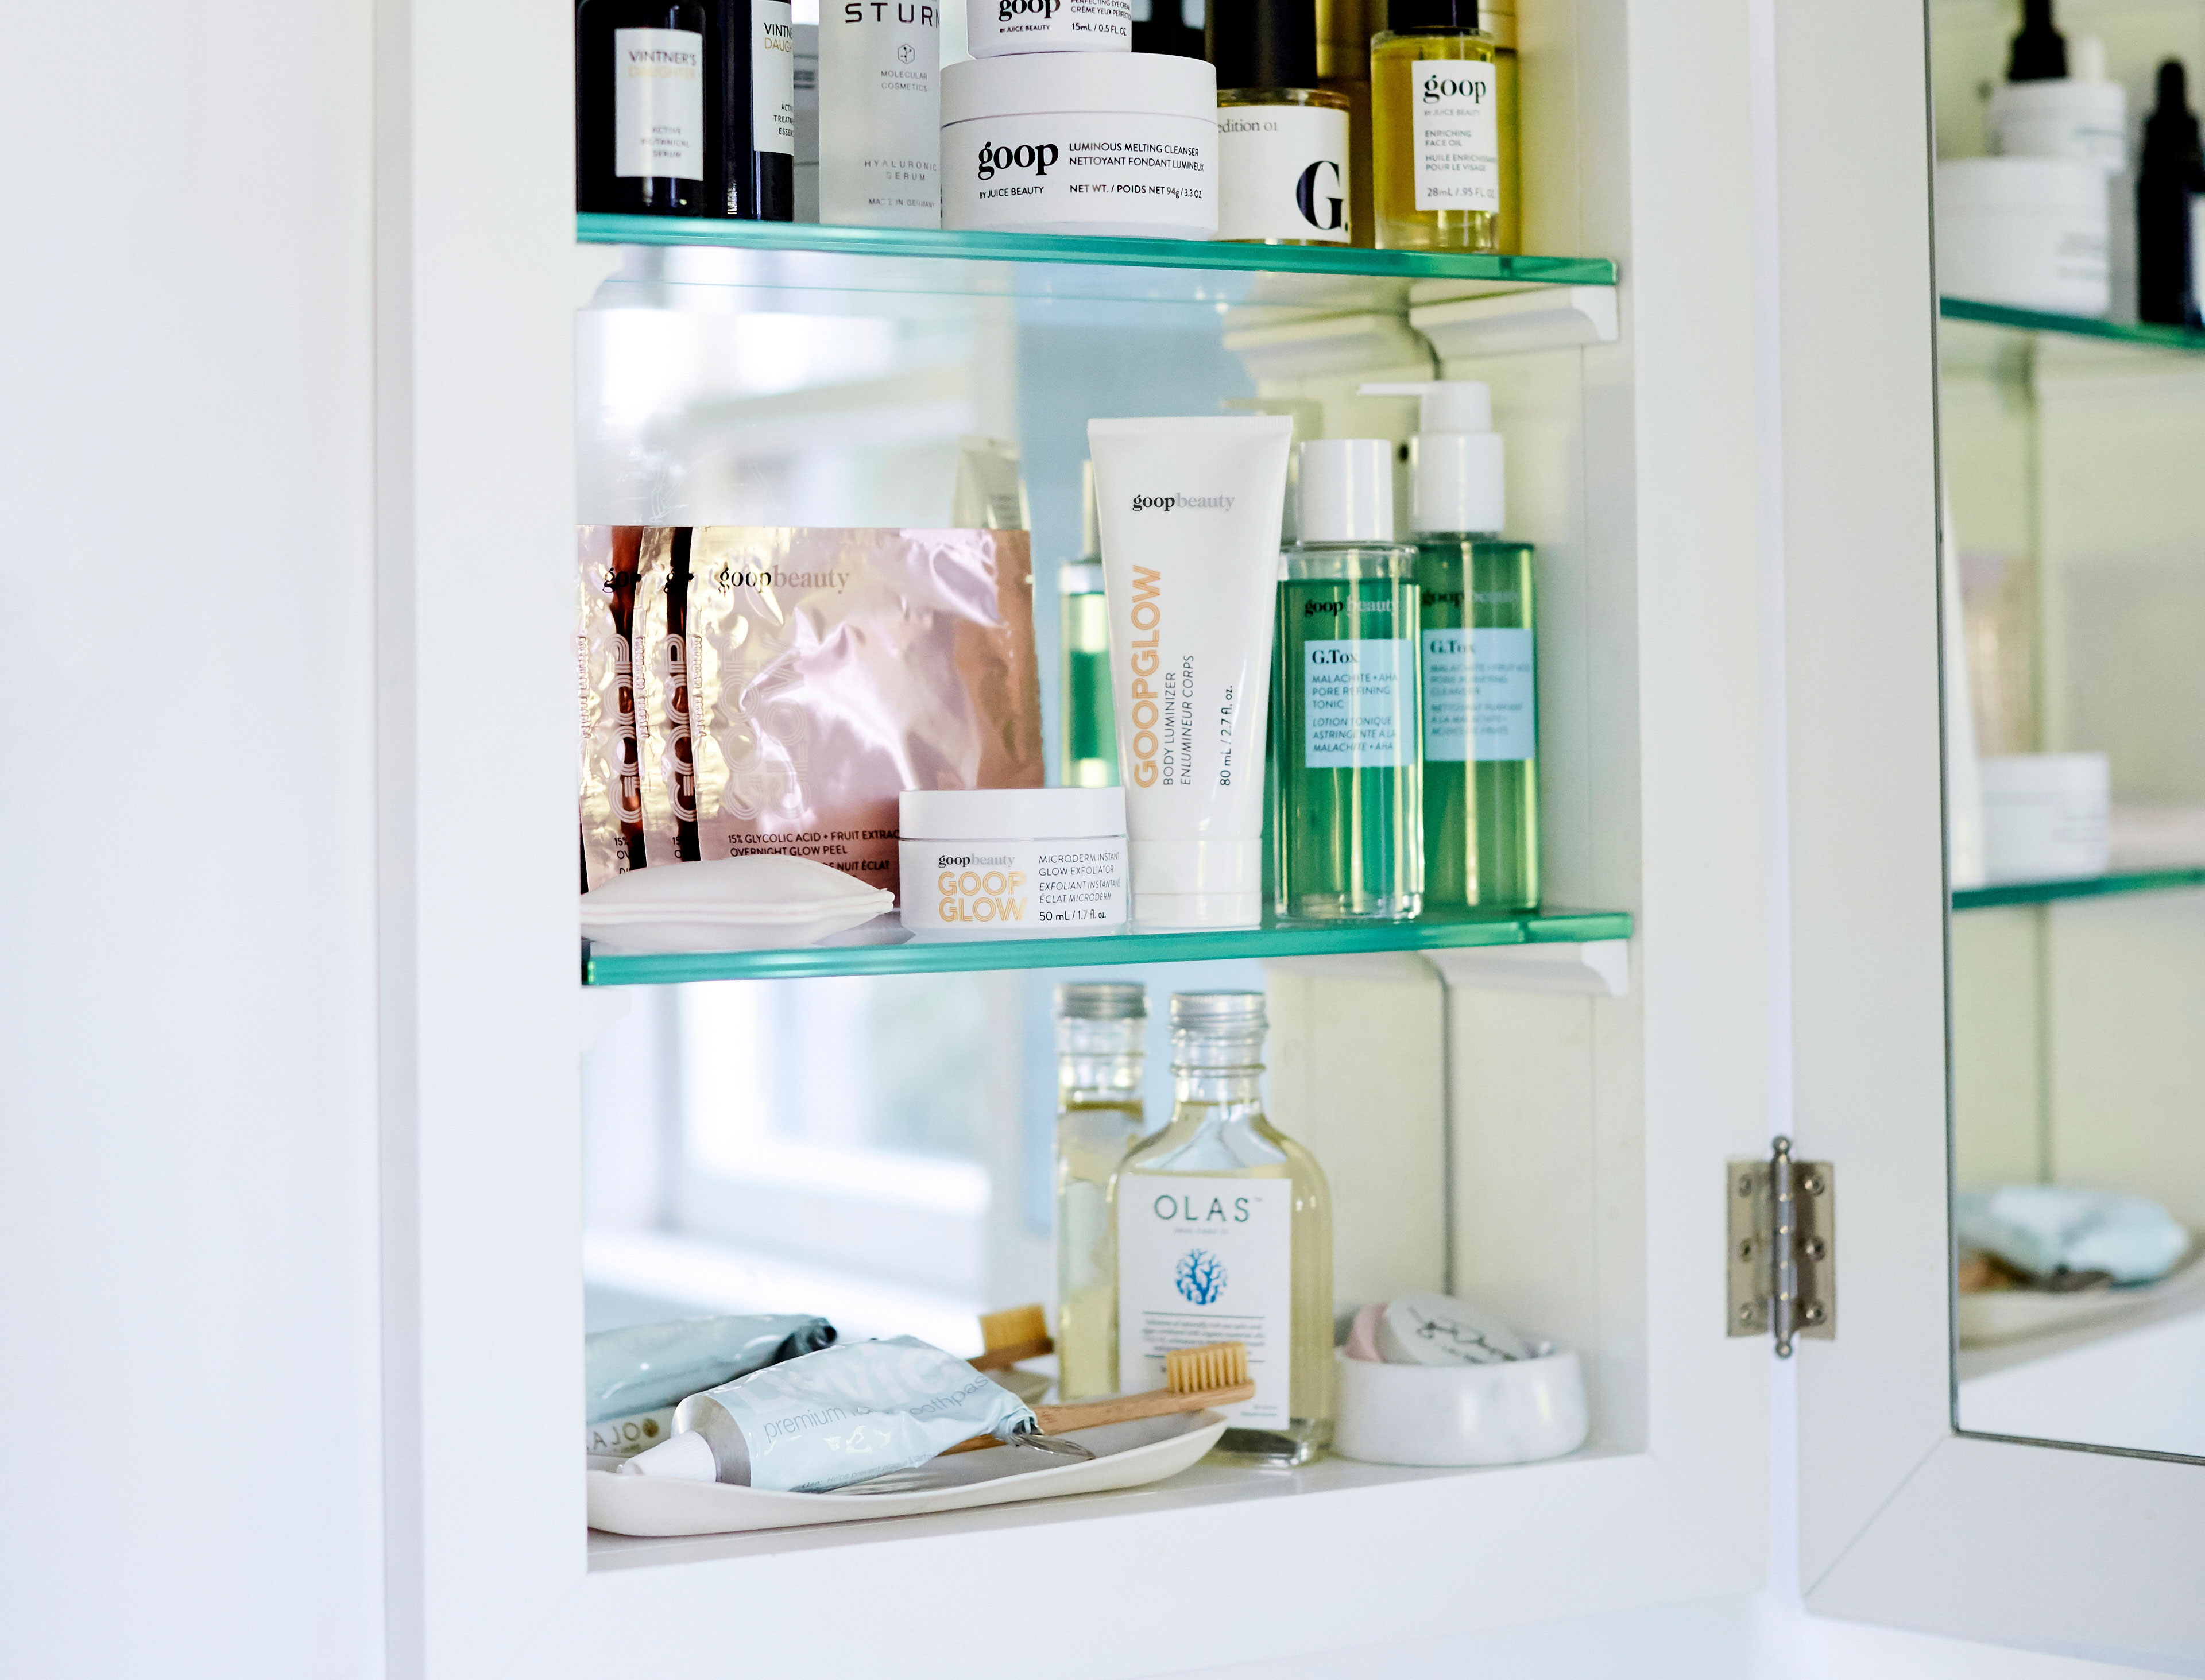 Clean Beauty—and Why It's Important